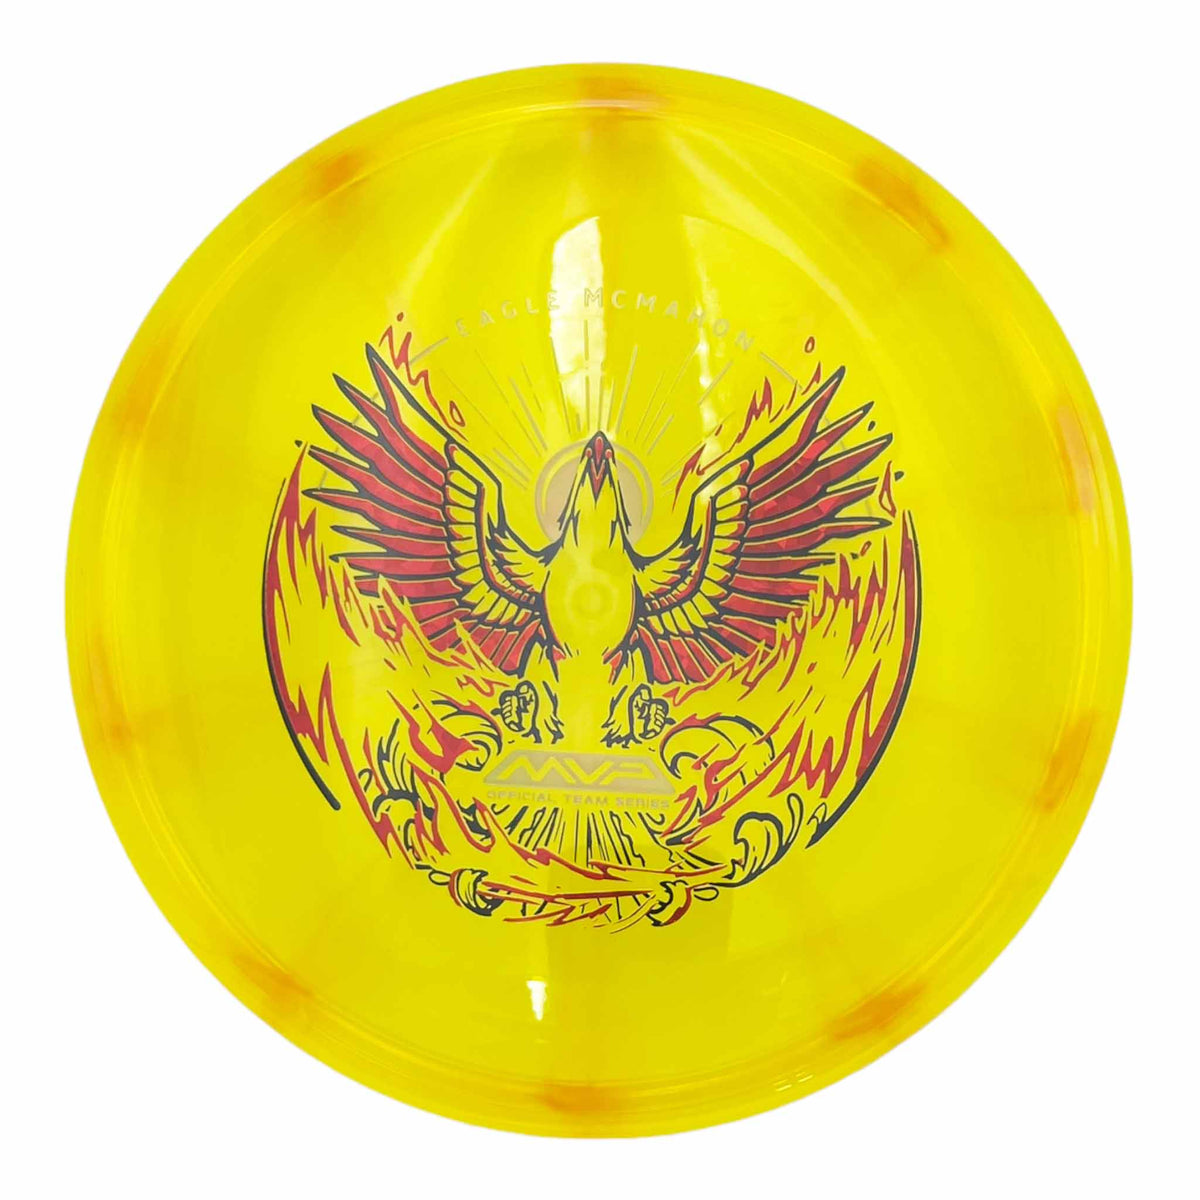 Axiom Discs Prism Proton Eagle McMahon Envy putter and approach - Yellow